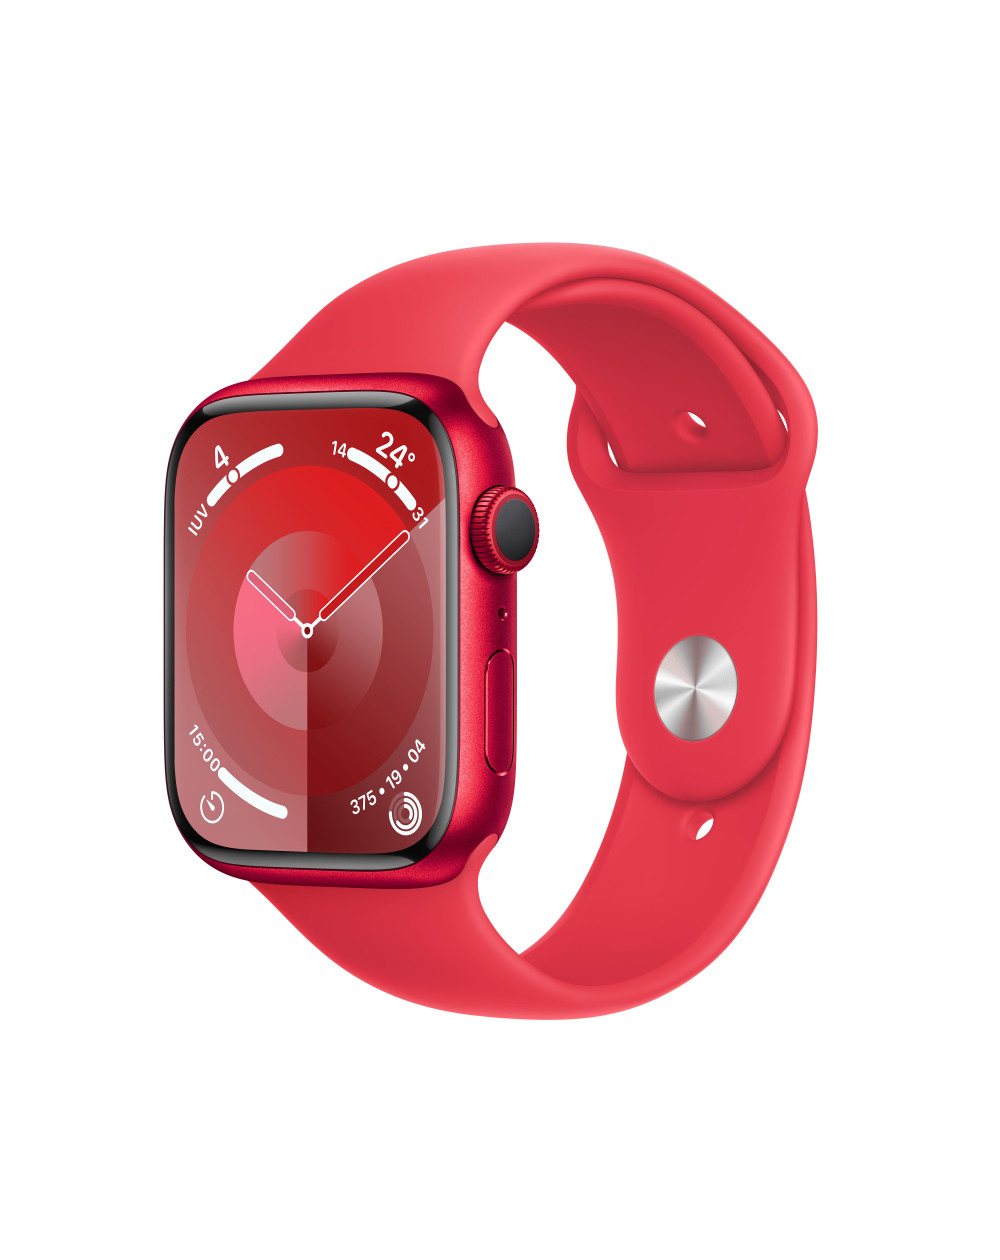 Watch Series 9 GPS 45mm (PRODUCT)RED Aluminium Case with (PRODUCT)RED Sport Band - M/L